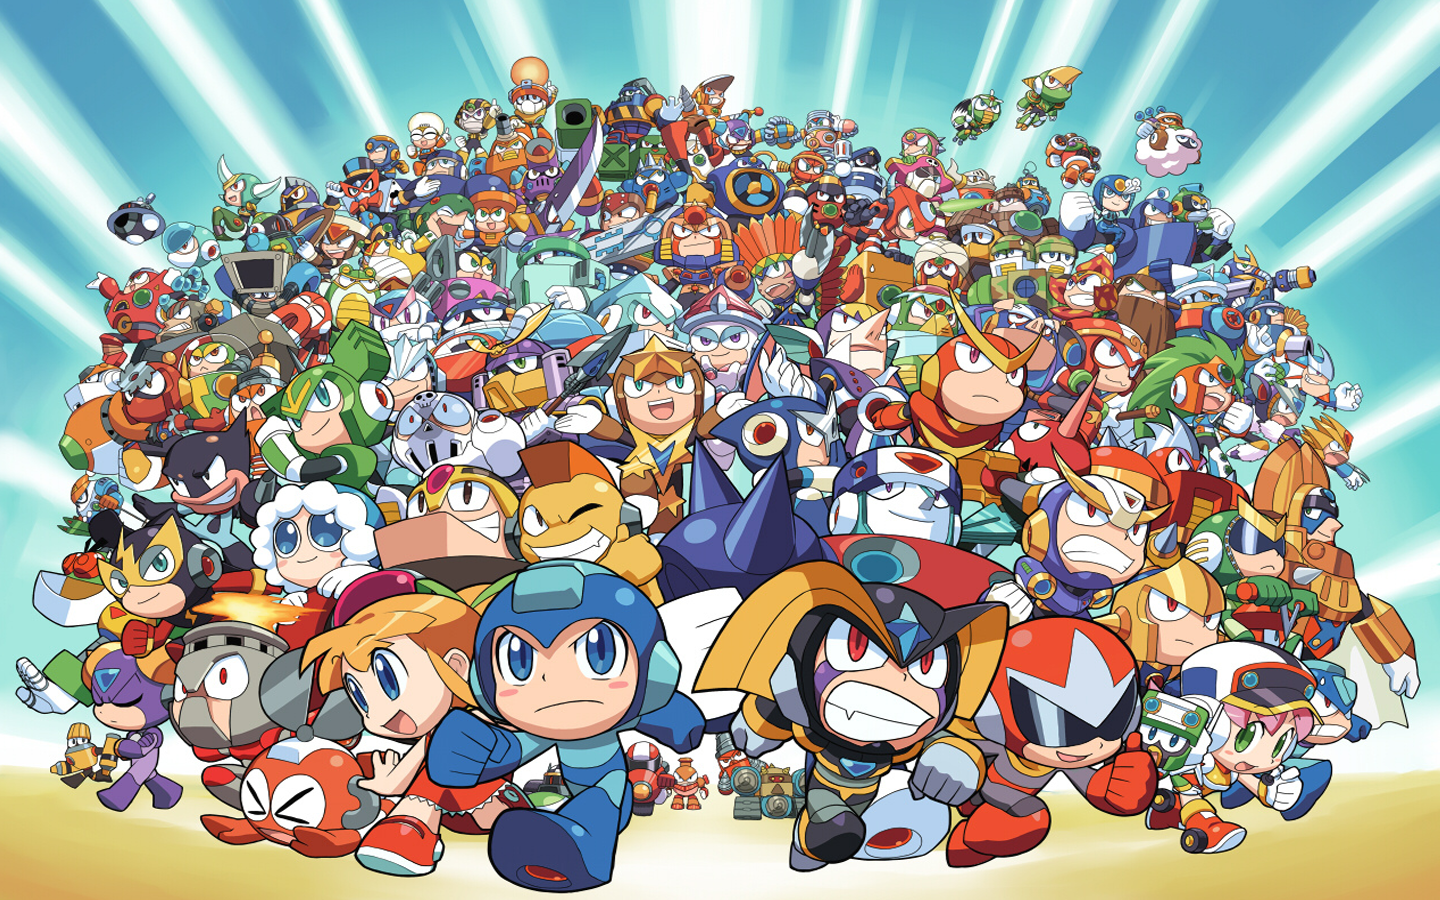 Mega Man Powered Up Picture